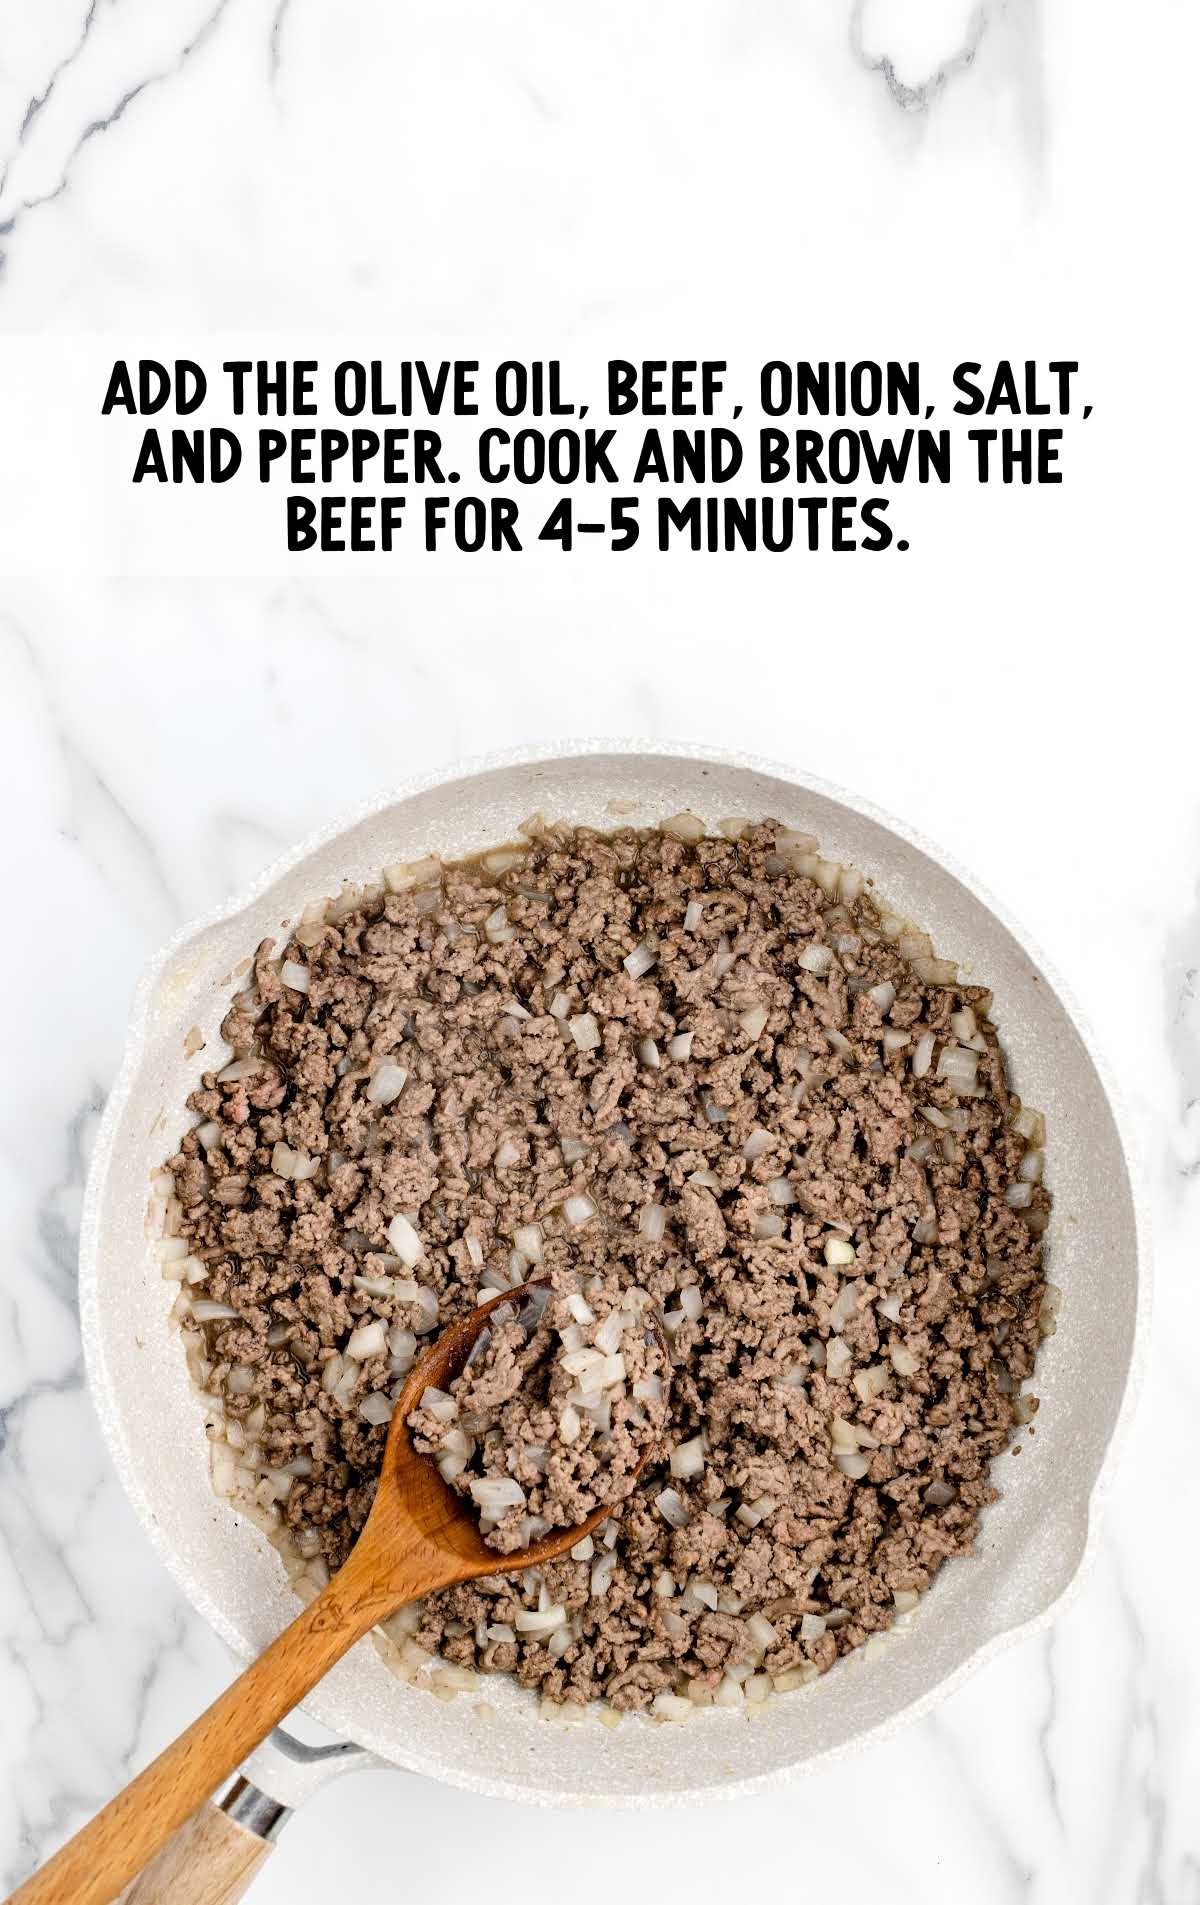 olive oil, beef, onion, salt, and pepper added with the beef